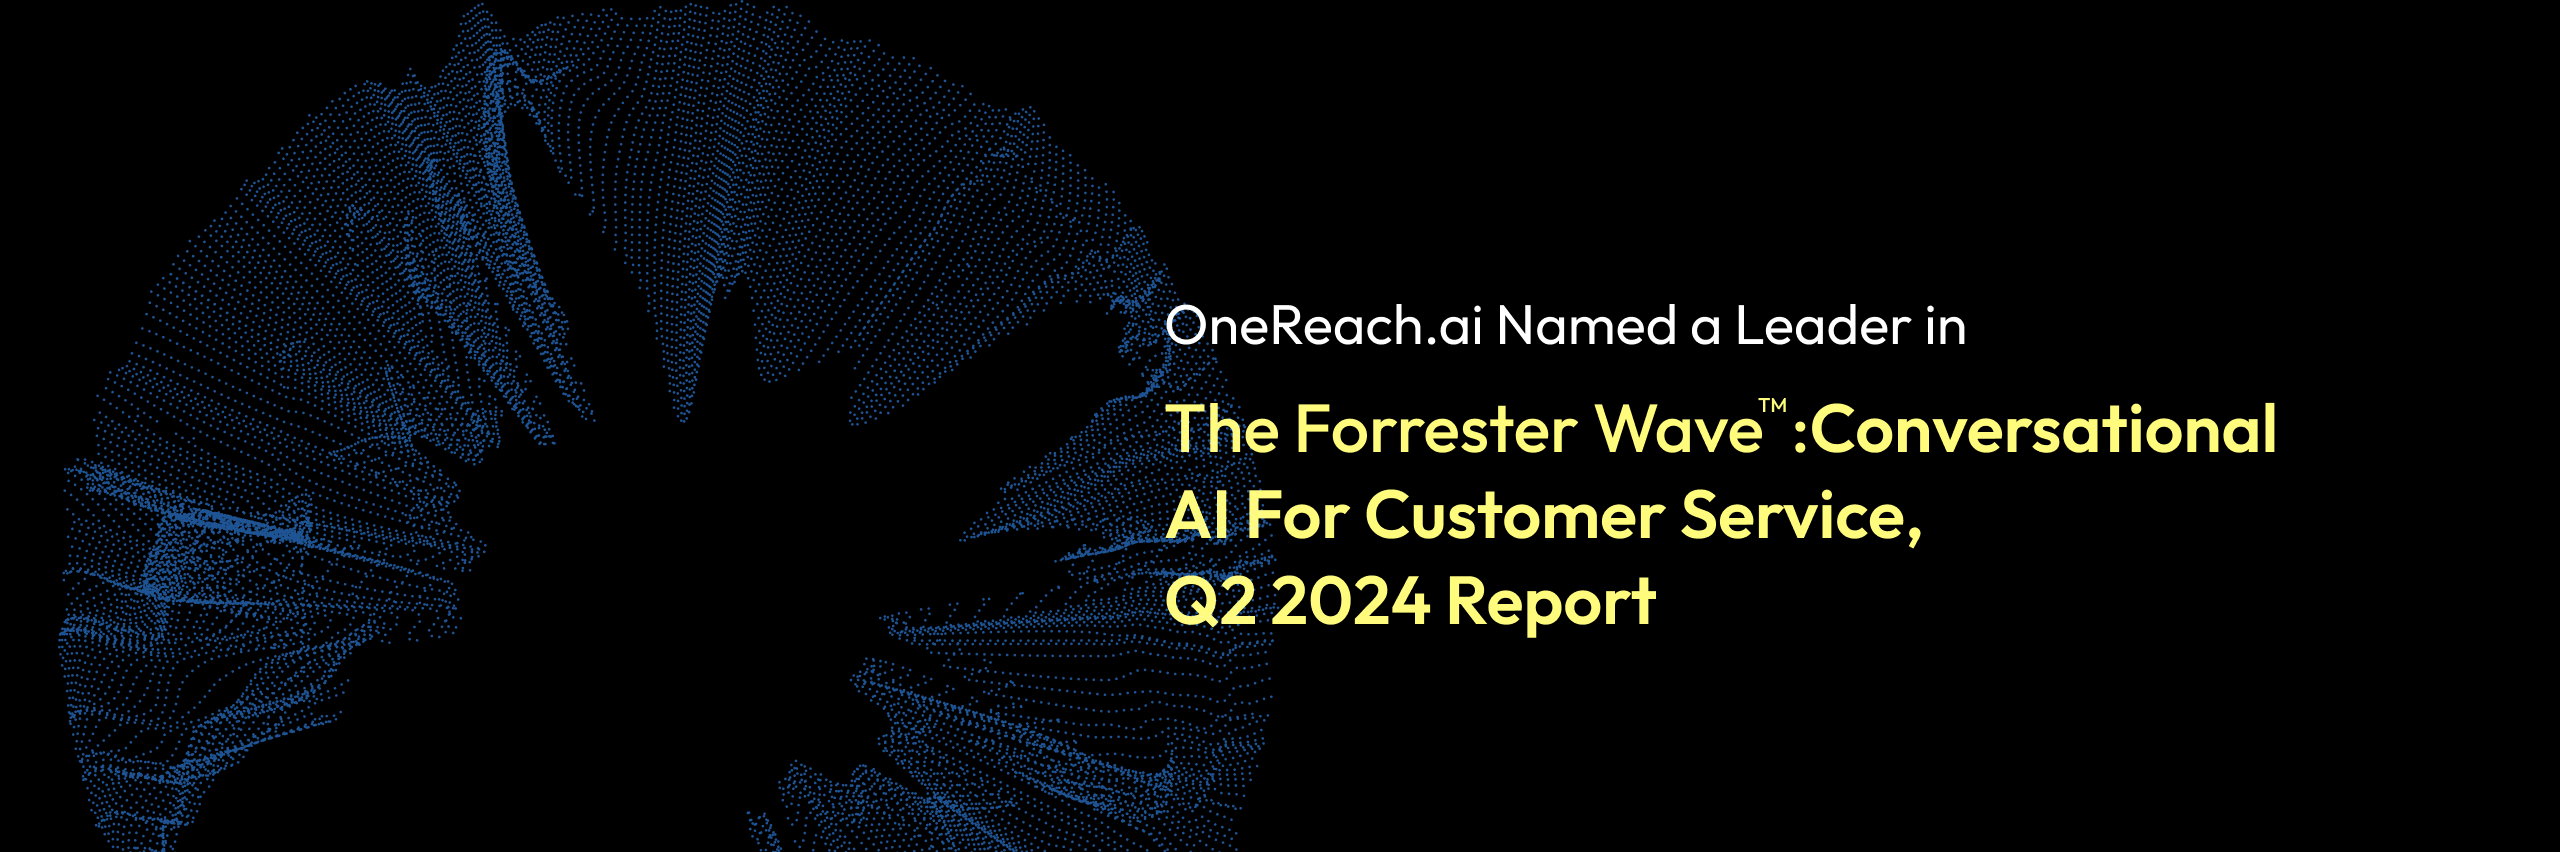 OneReach.ai Named a Leader in The Forrester Wave™: Conversational AI For Customer Service, Q2 2024 Report